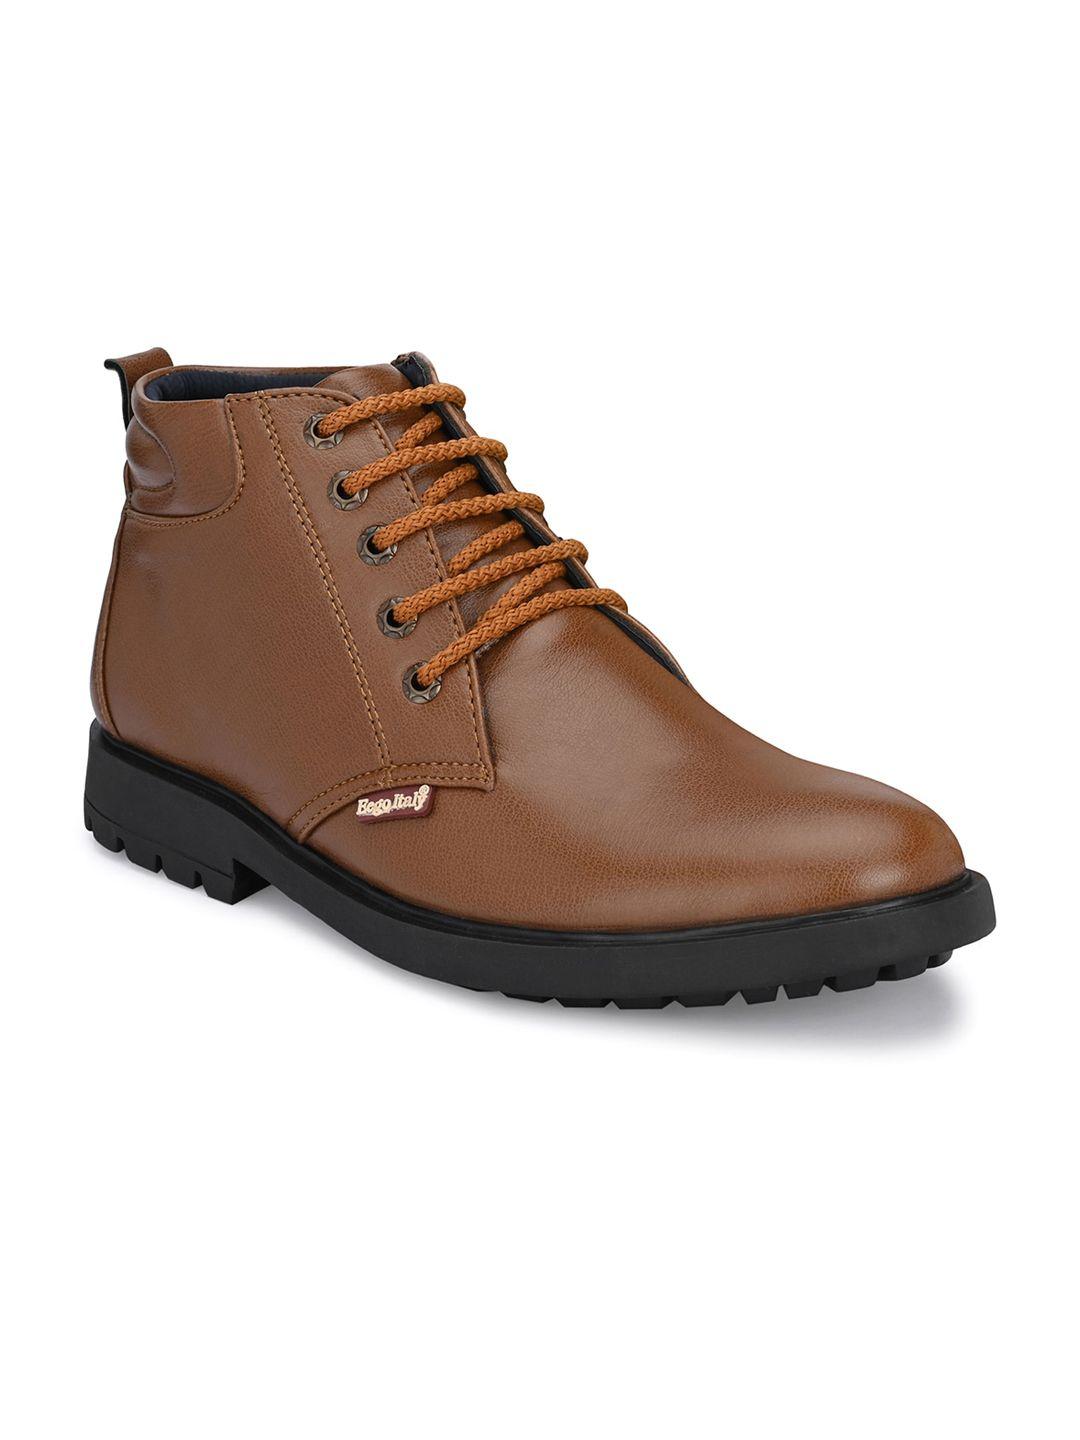 eego italy men mid-ankle boots